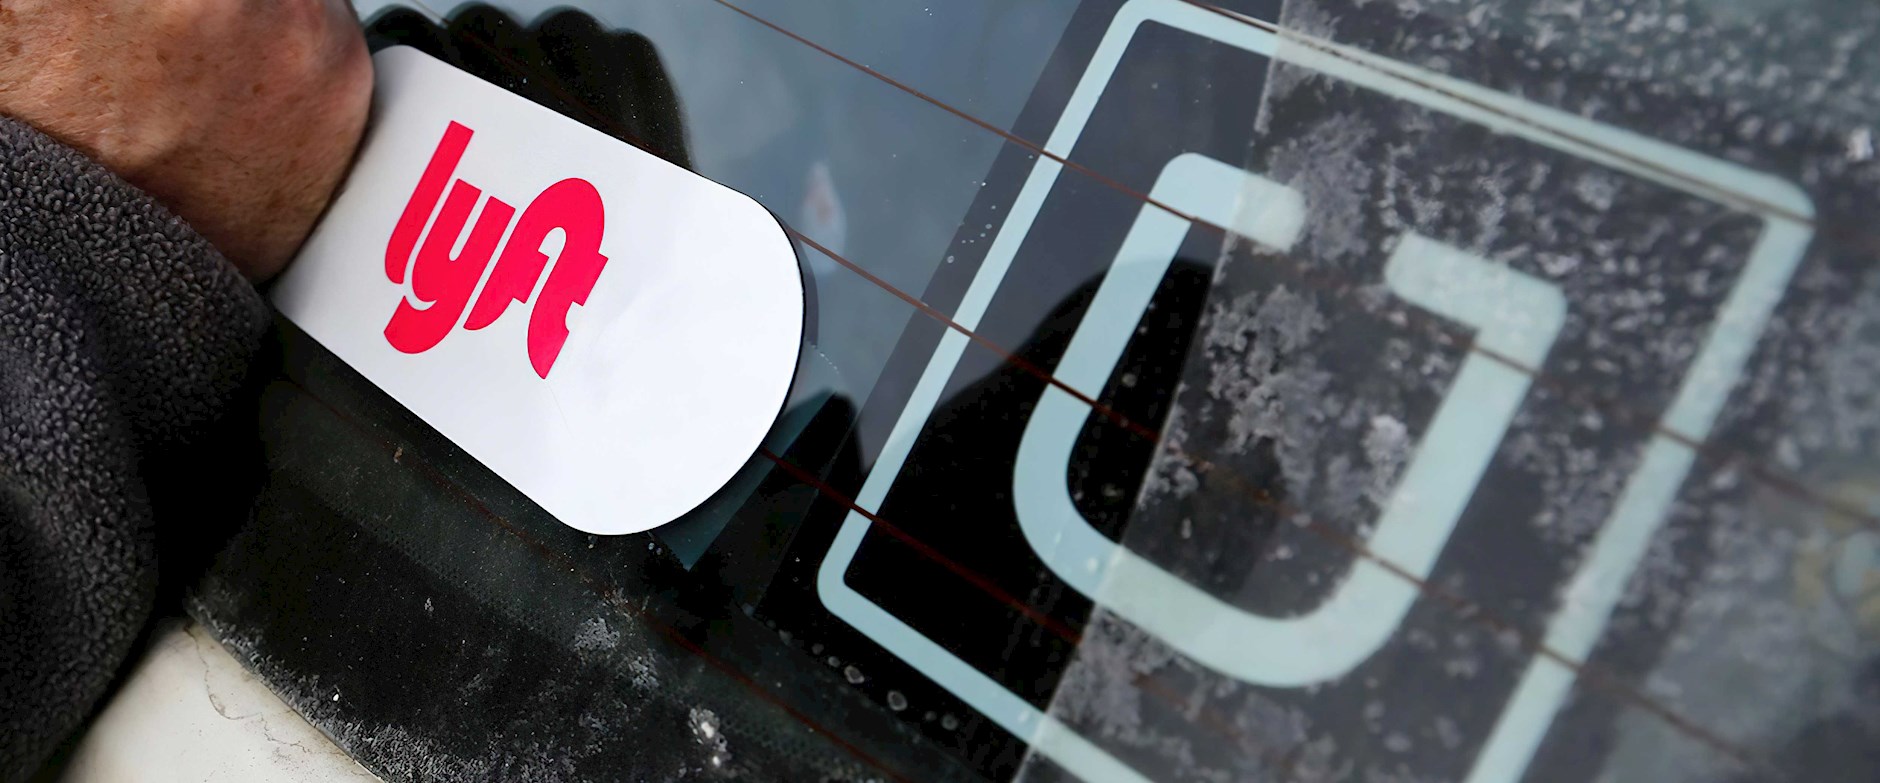 Car window with Uber and Lyft stickers